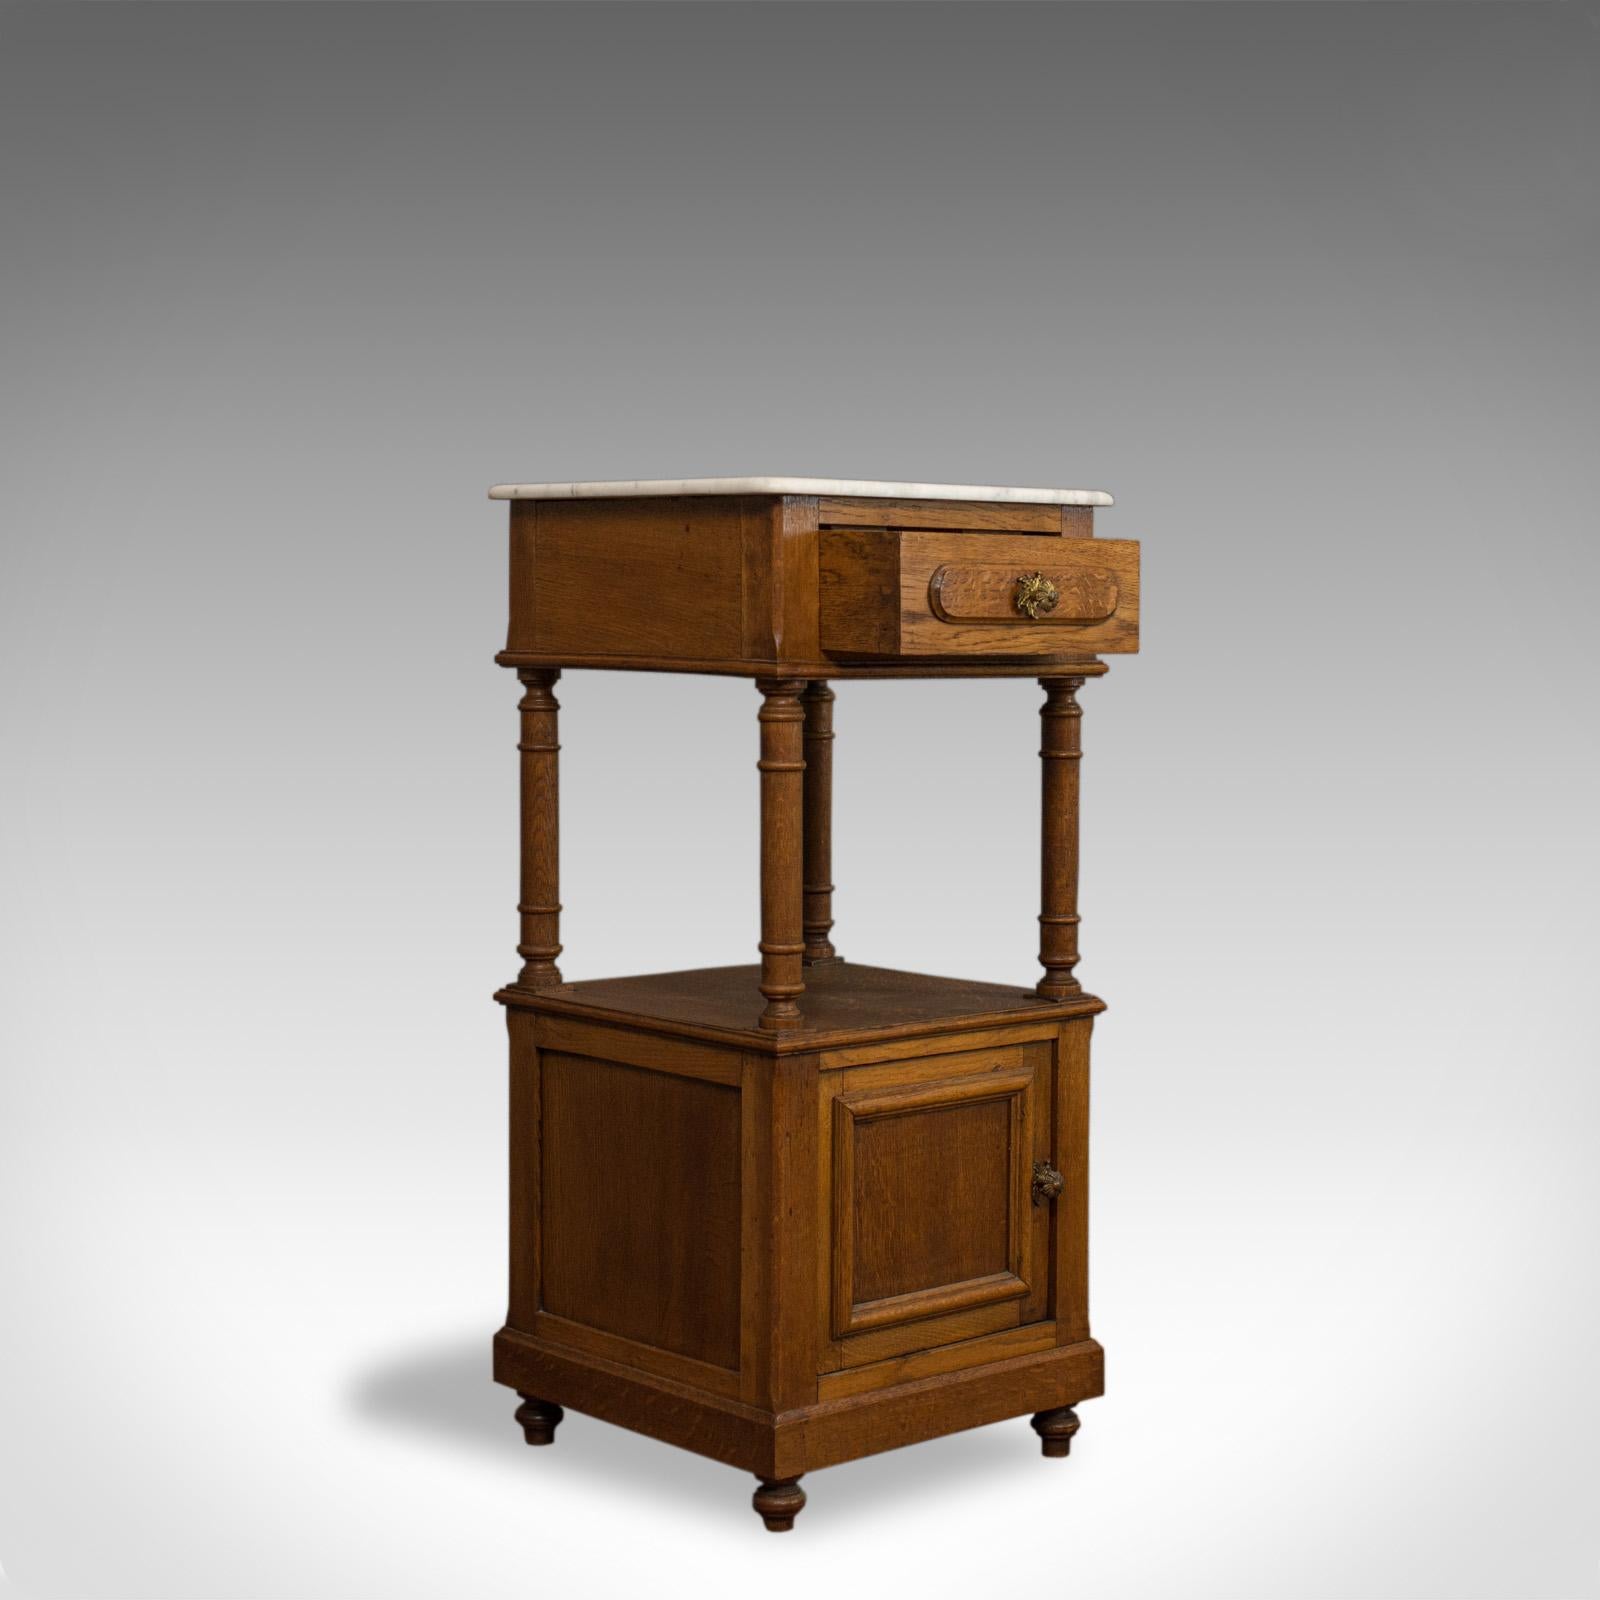 This is an antique bedside cabinet. A French, oak and marble lamp nightstand table dating to the early 20th century, circa 1930.

Select oak with wisps of medullary rays and fine grain interest
Good consistent whiskey hues and a desirable aged